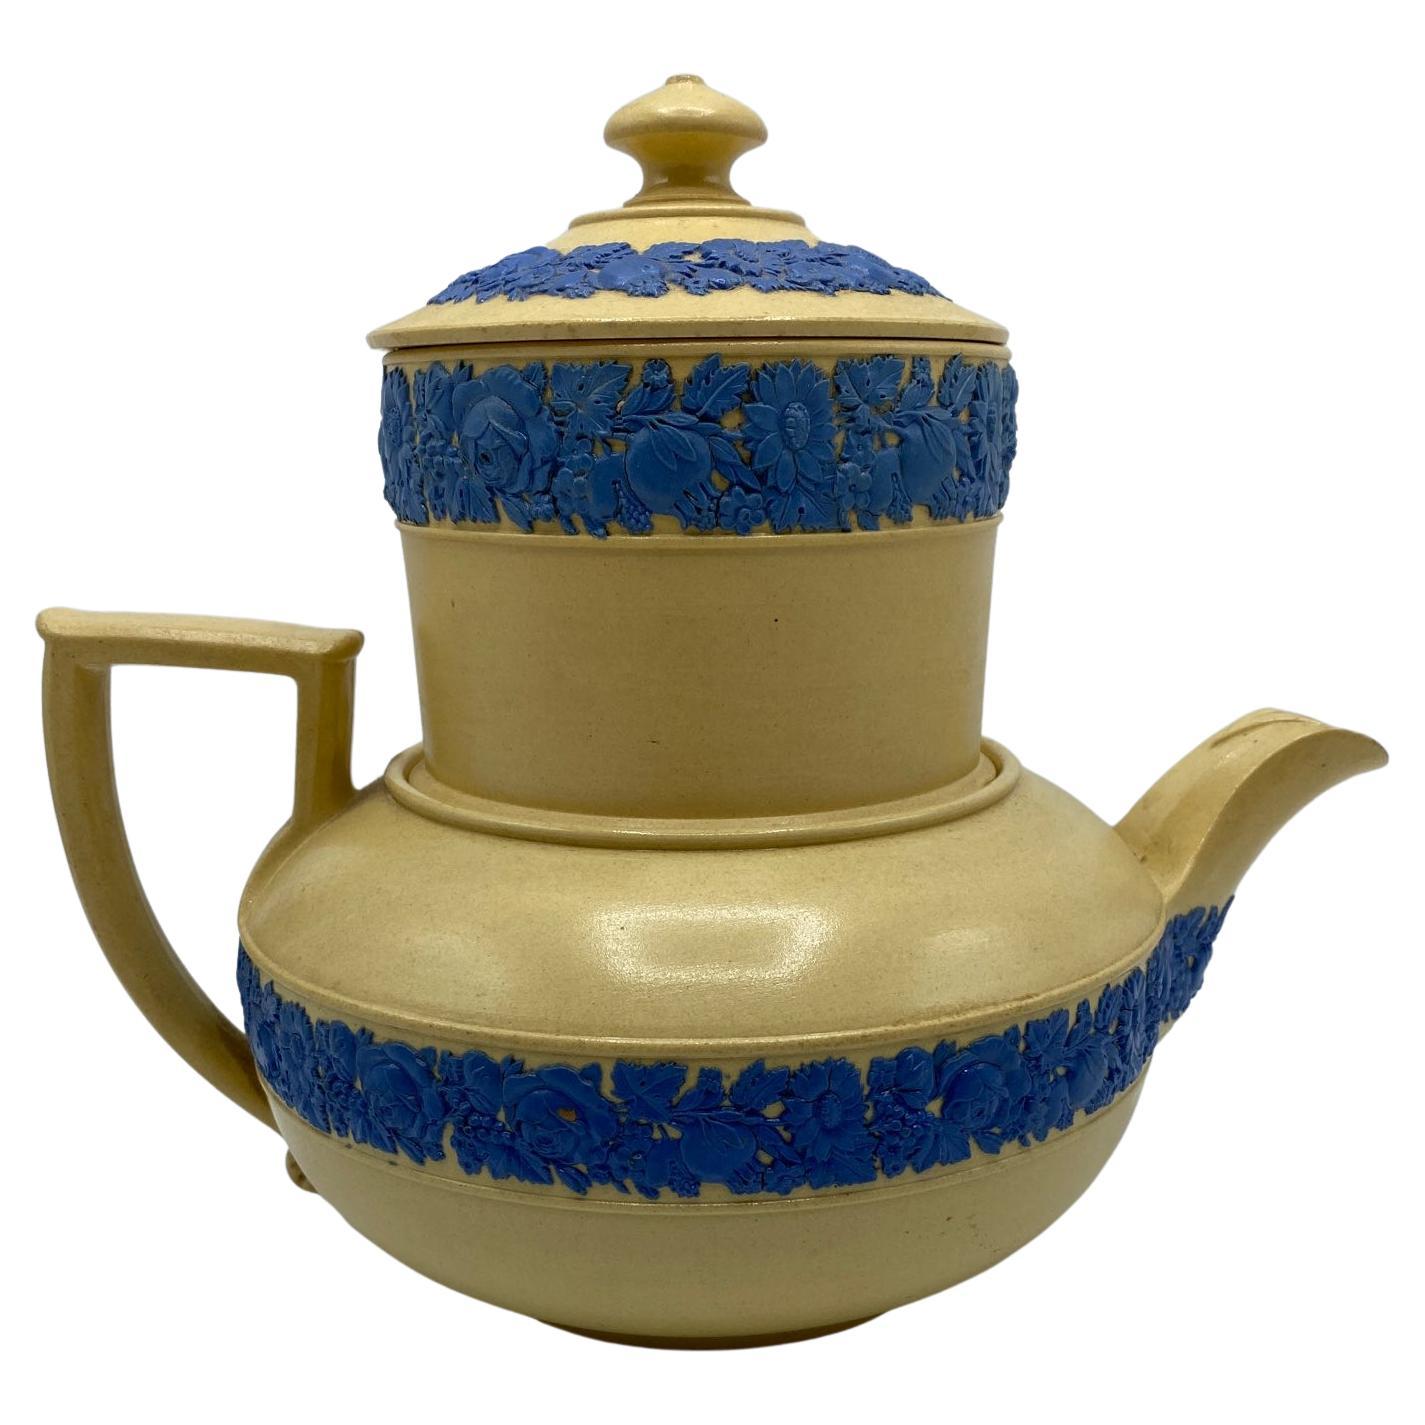 Early 19th Century Wedgwood Porcelain Biggin Teapot with Blue Glazed Accents